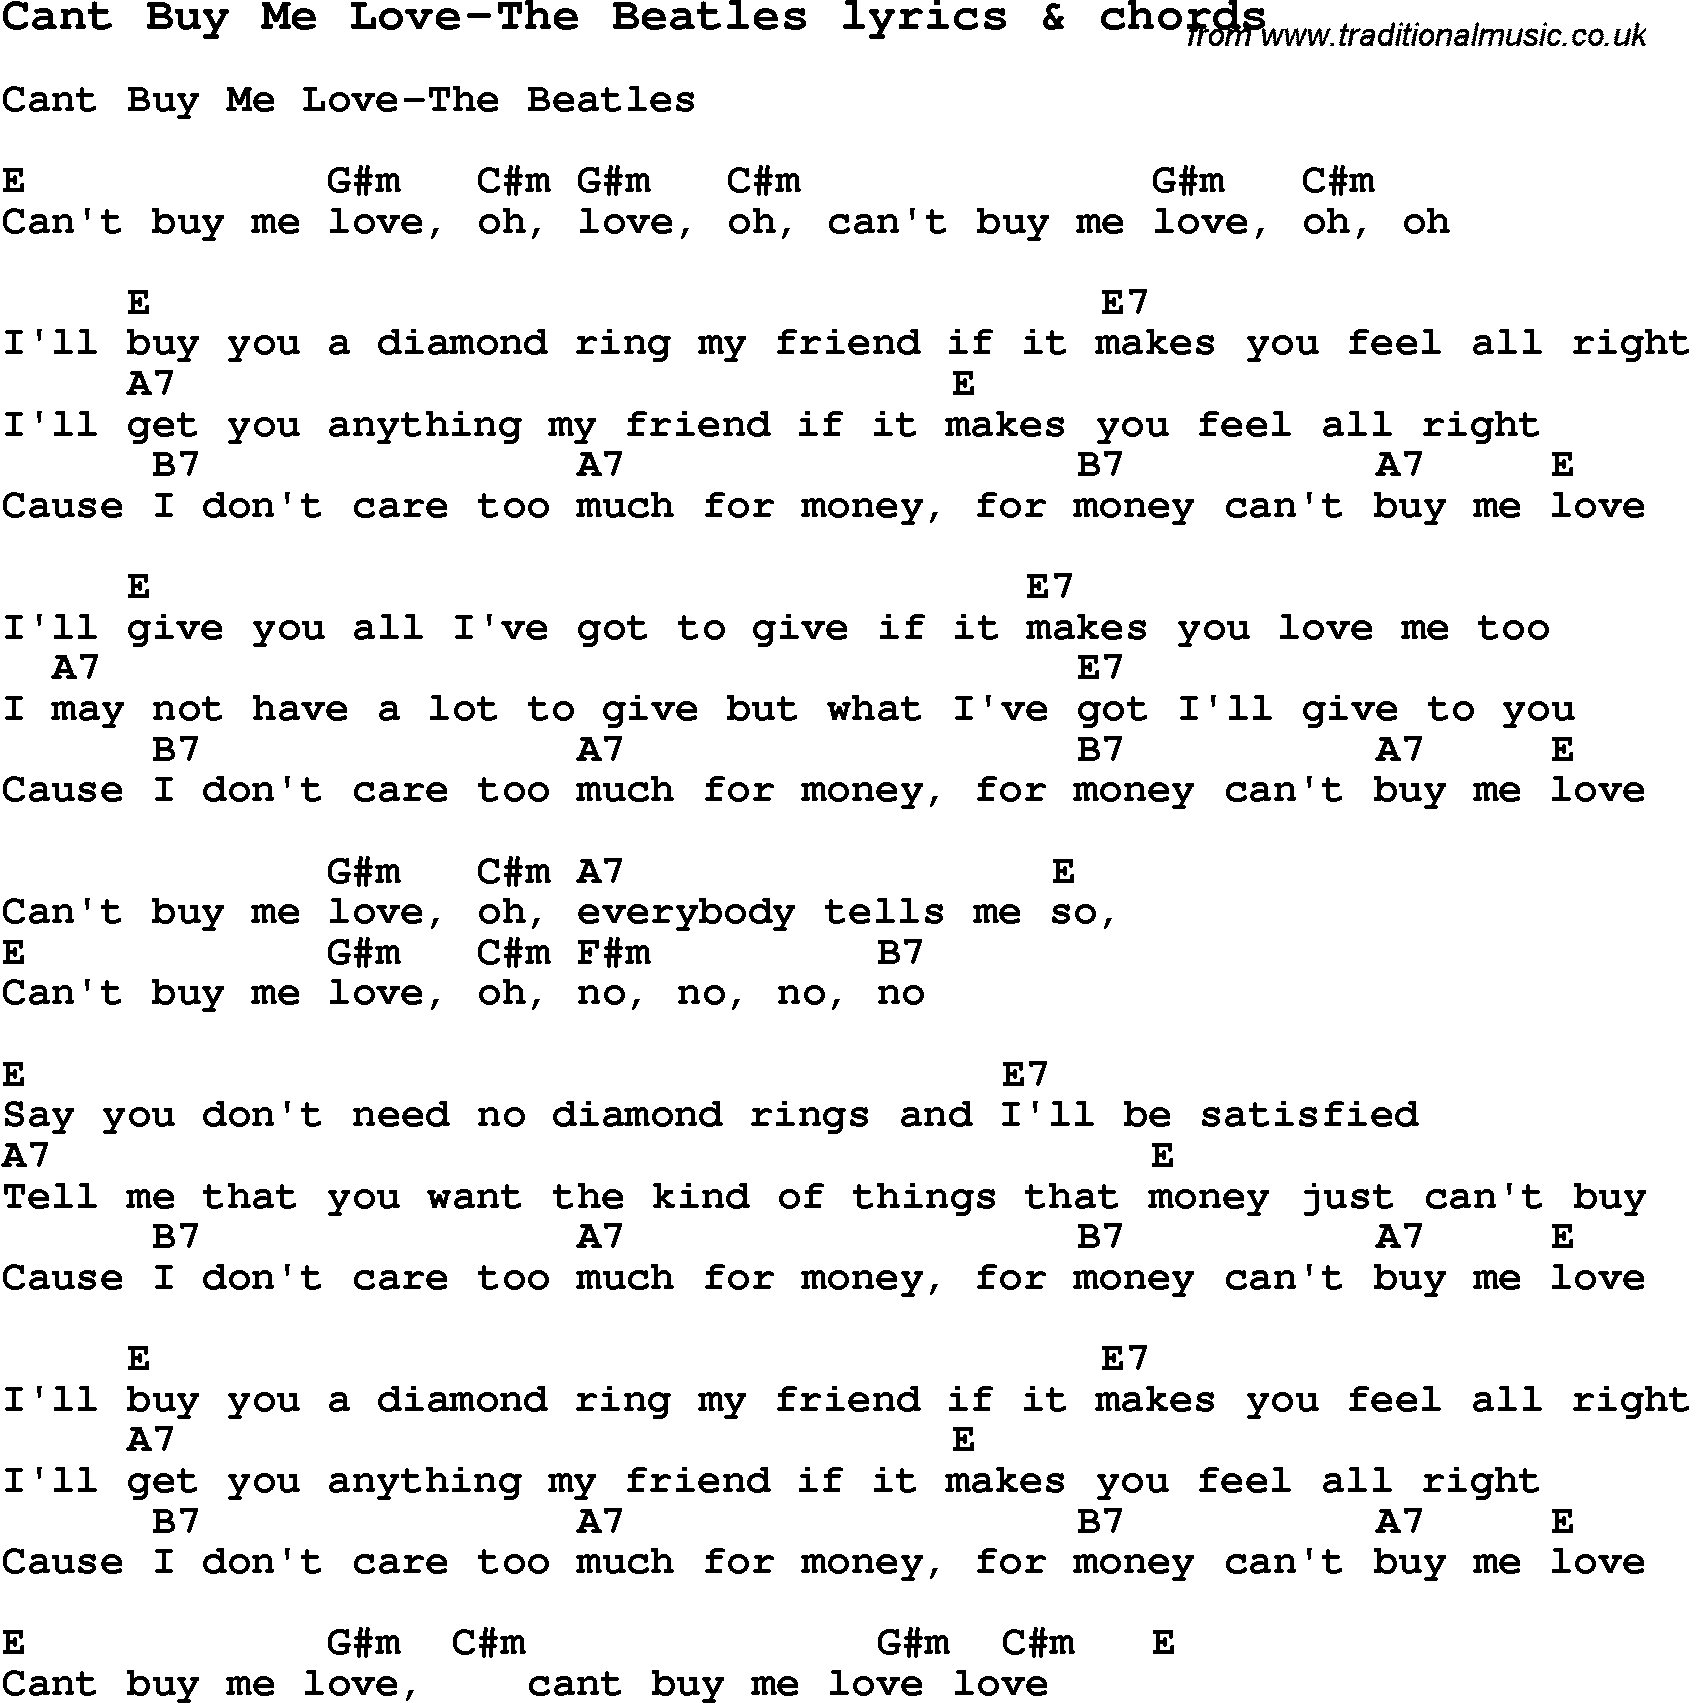 Love Song Lyrics for: Cant Buy Me Love-The Beatles with chords for Ukulele, Guitar Banjo etc.